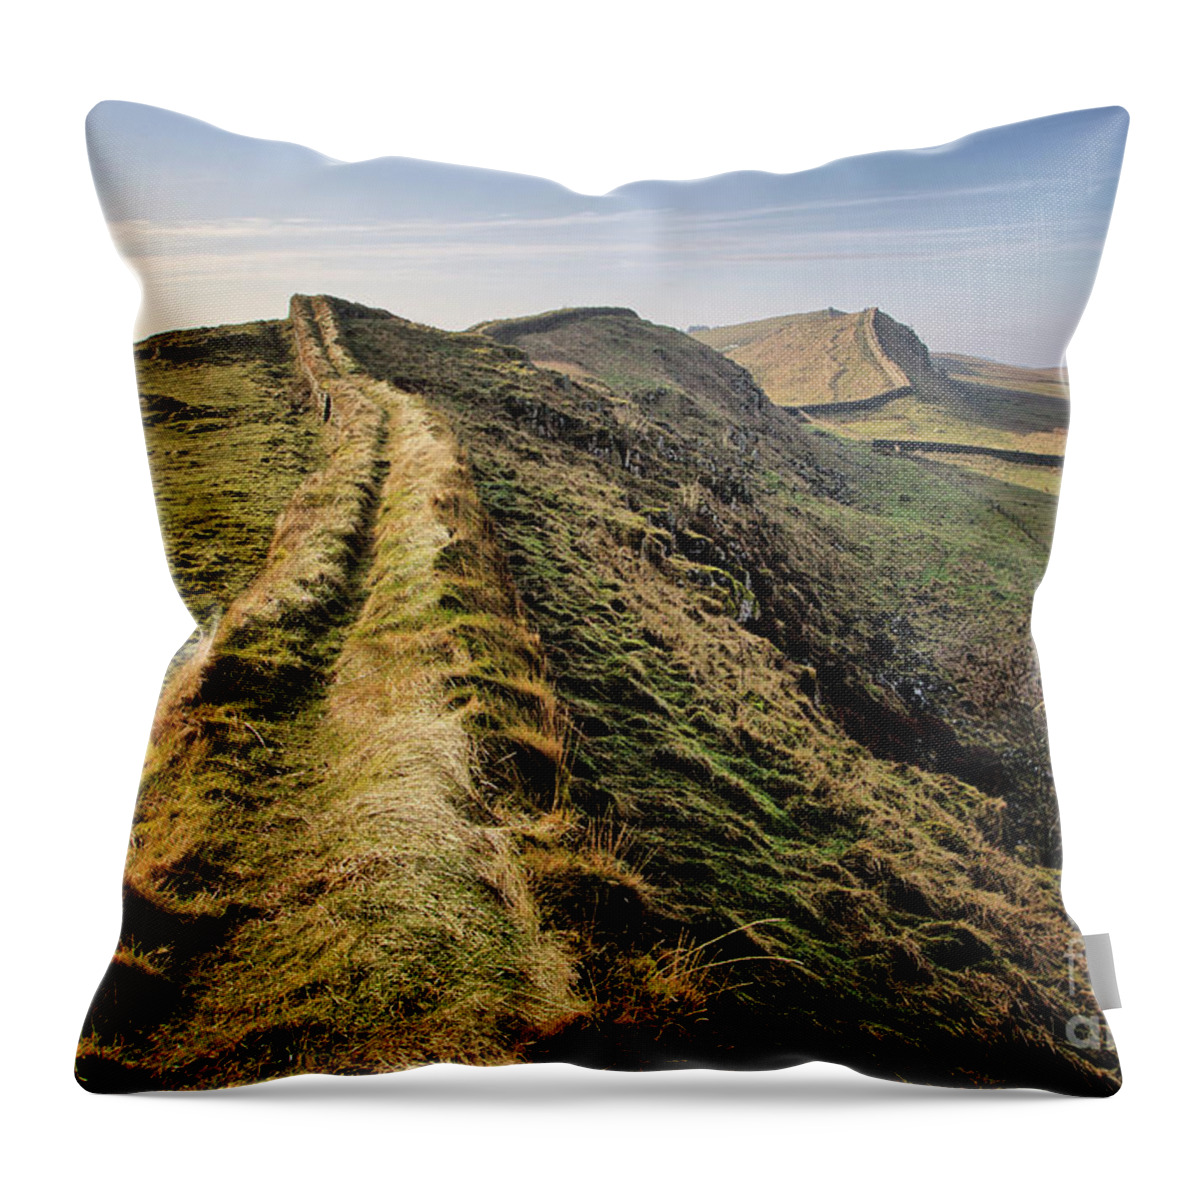 Hadrians Wall Throw Pillow featuring the photograph Hadrians Wall by Smart Aviation